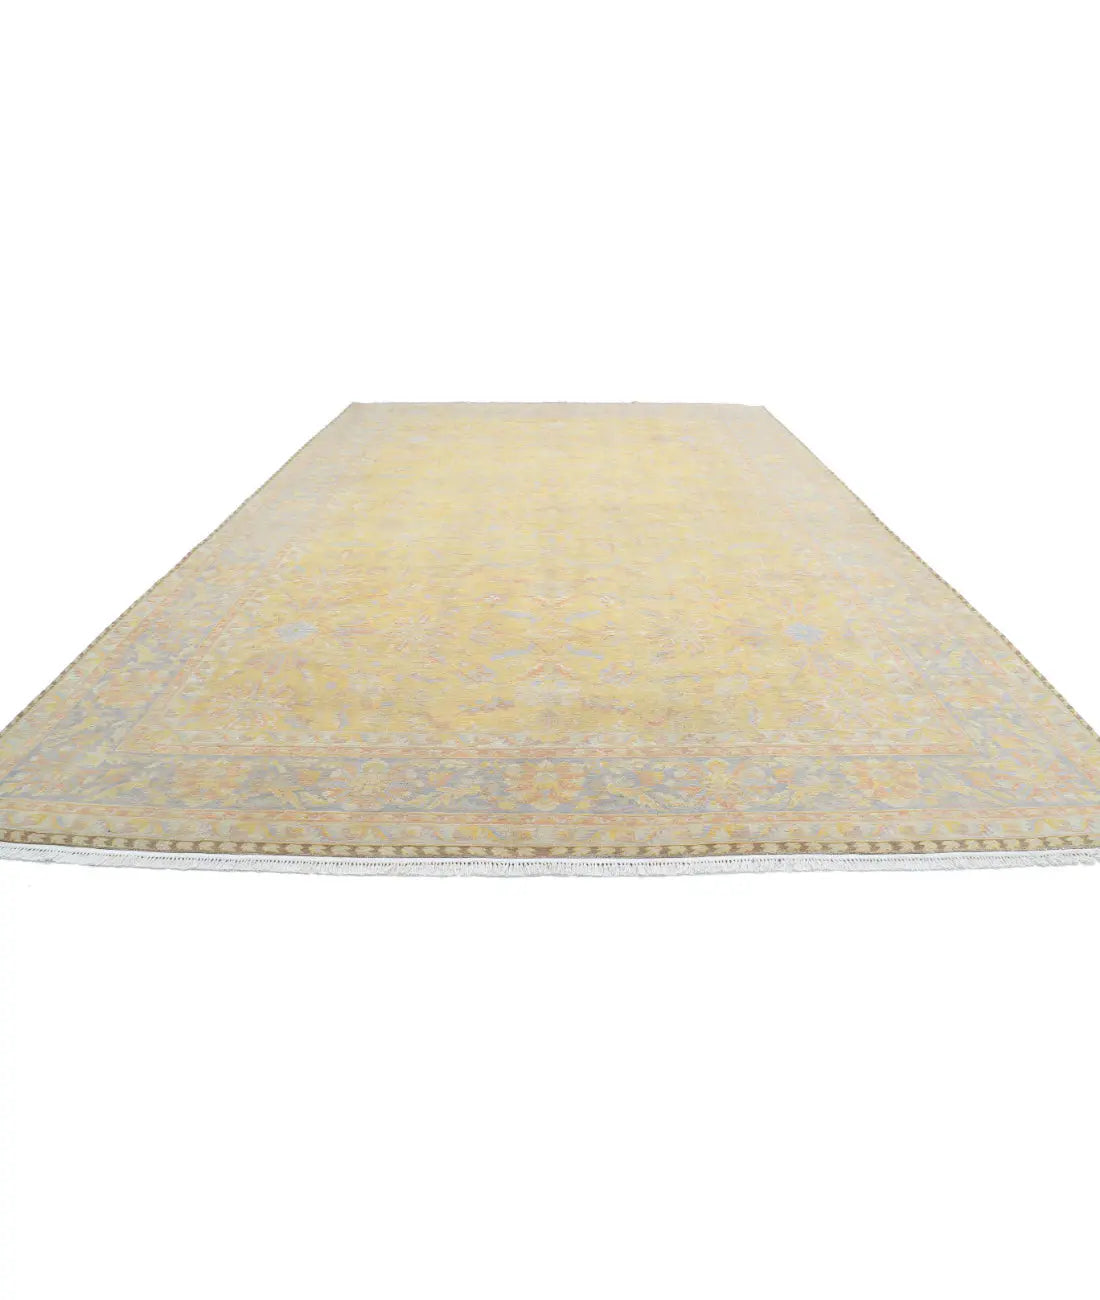 Hand Knotted Agra Wool Rug - 12'0'' x 18'2''